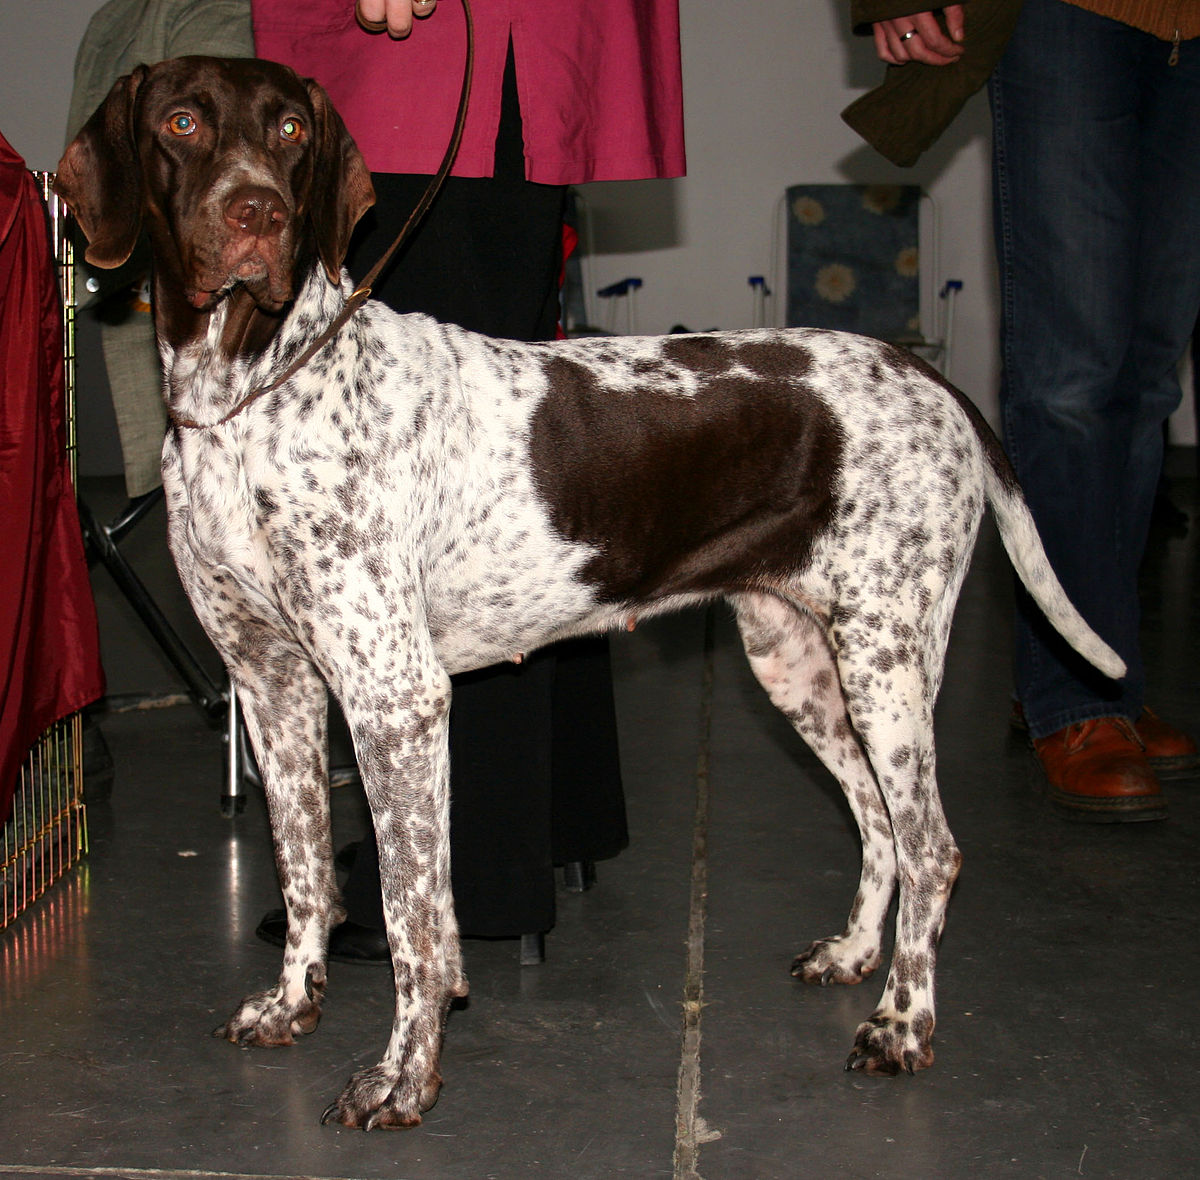 spotted hunting dog